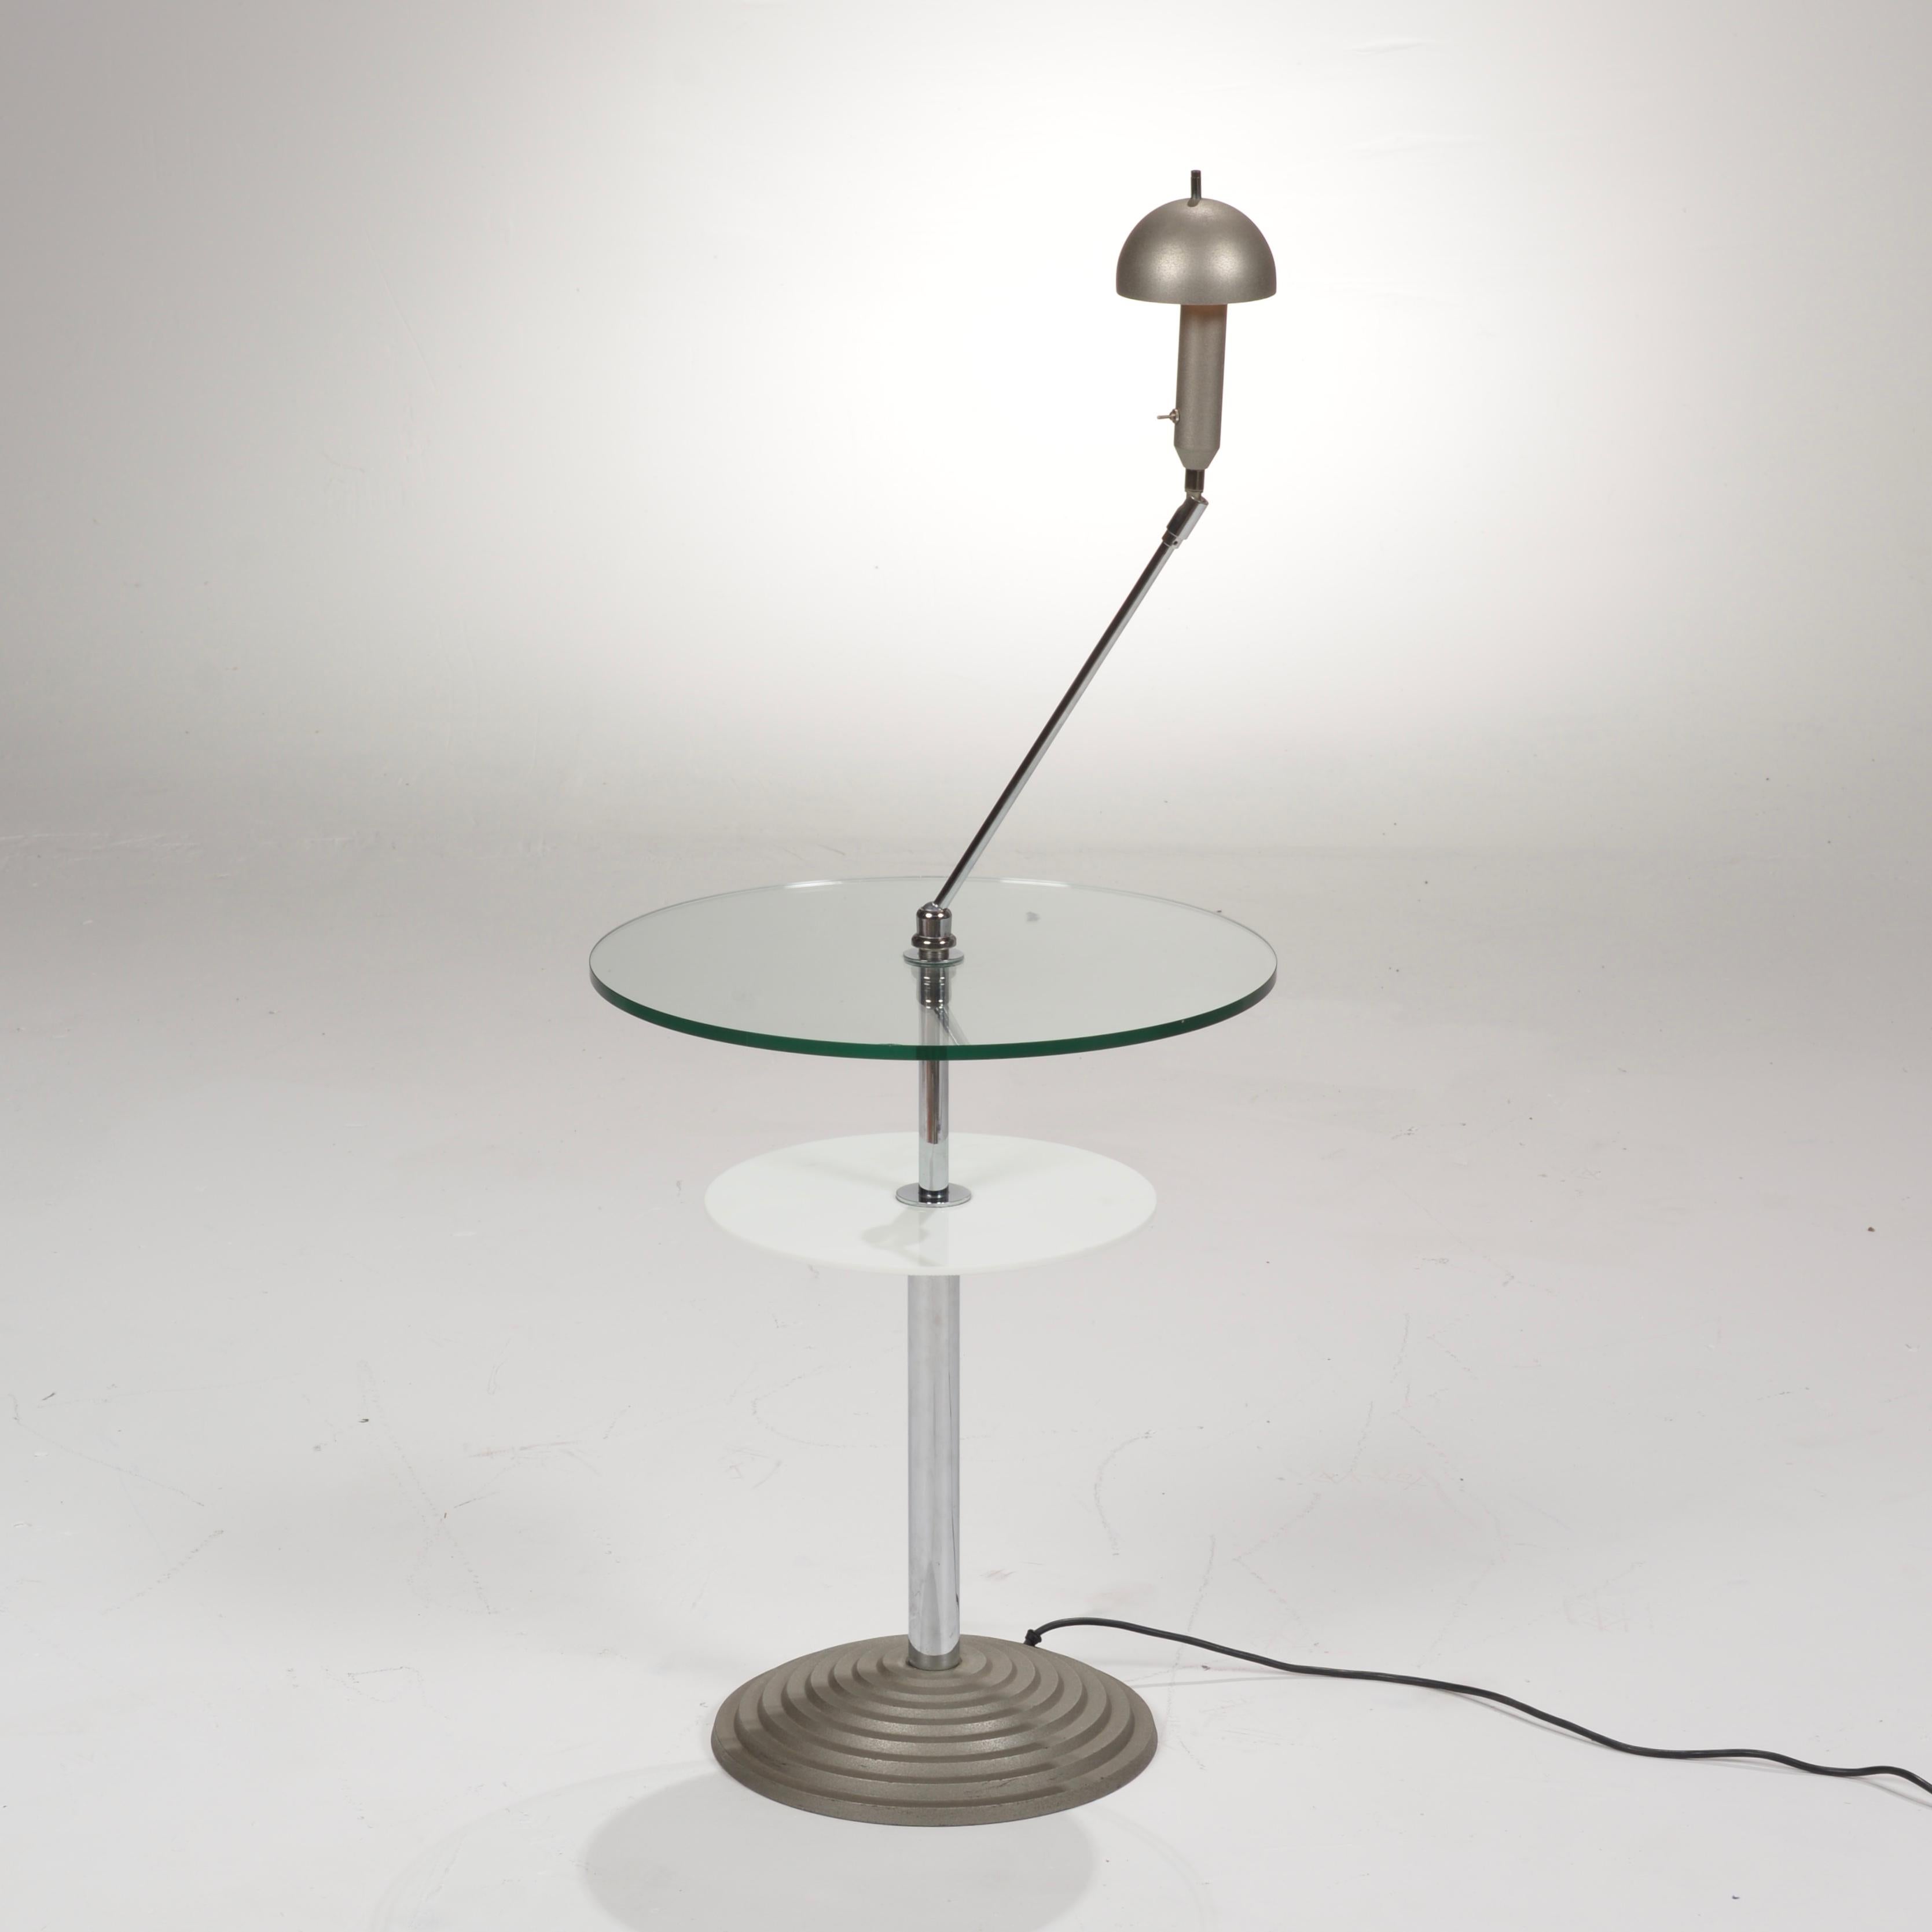 A amazing Memphis style lamp table by Daniela Puppa and Franco Raggi for Fontana Arte. Adjustable inclination stem, glass, opaline glass, metal. Model Altair 2755, Italy, 1988.

All items are viewable at our Los Angeles Arts District showroom and